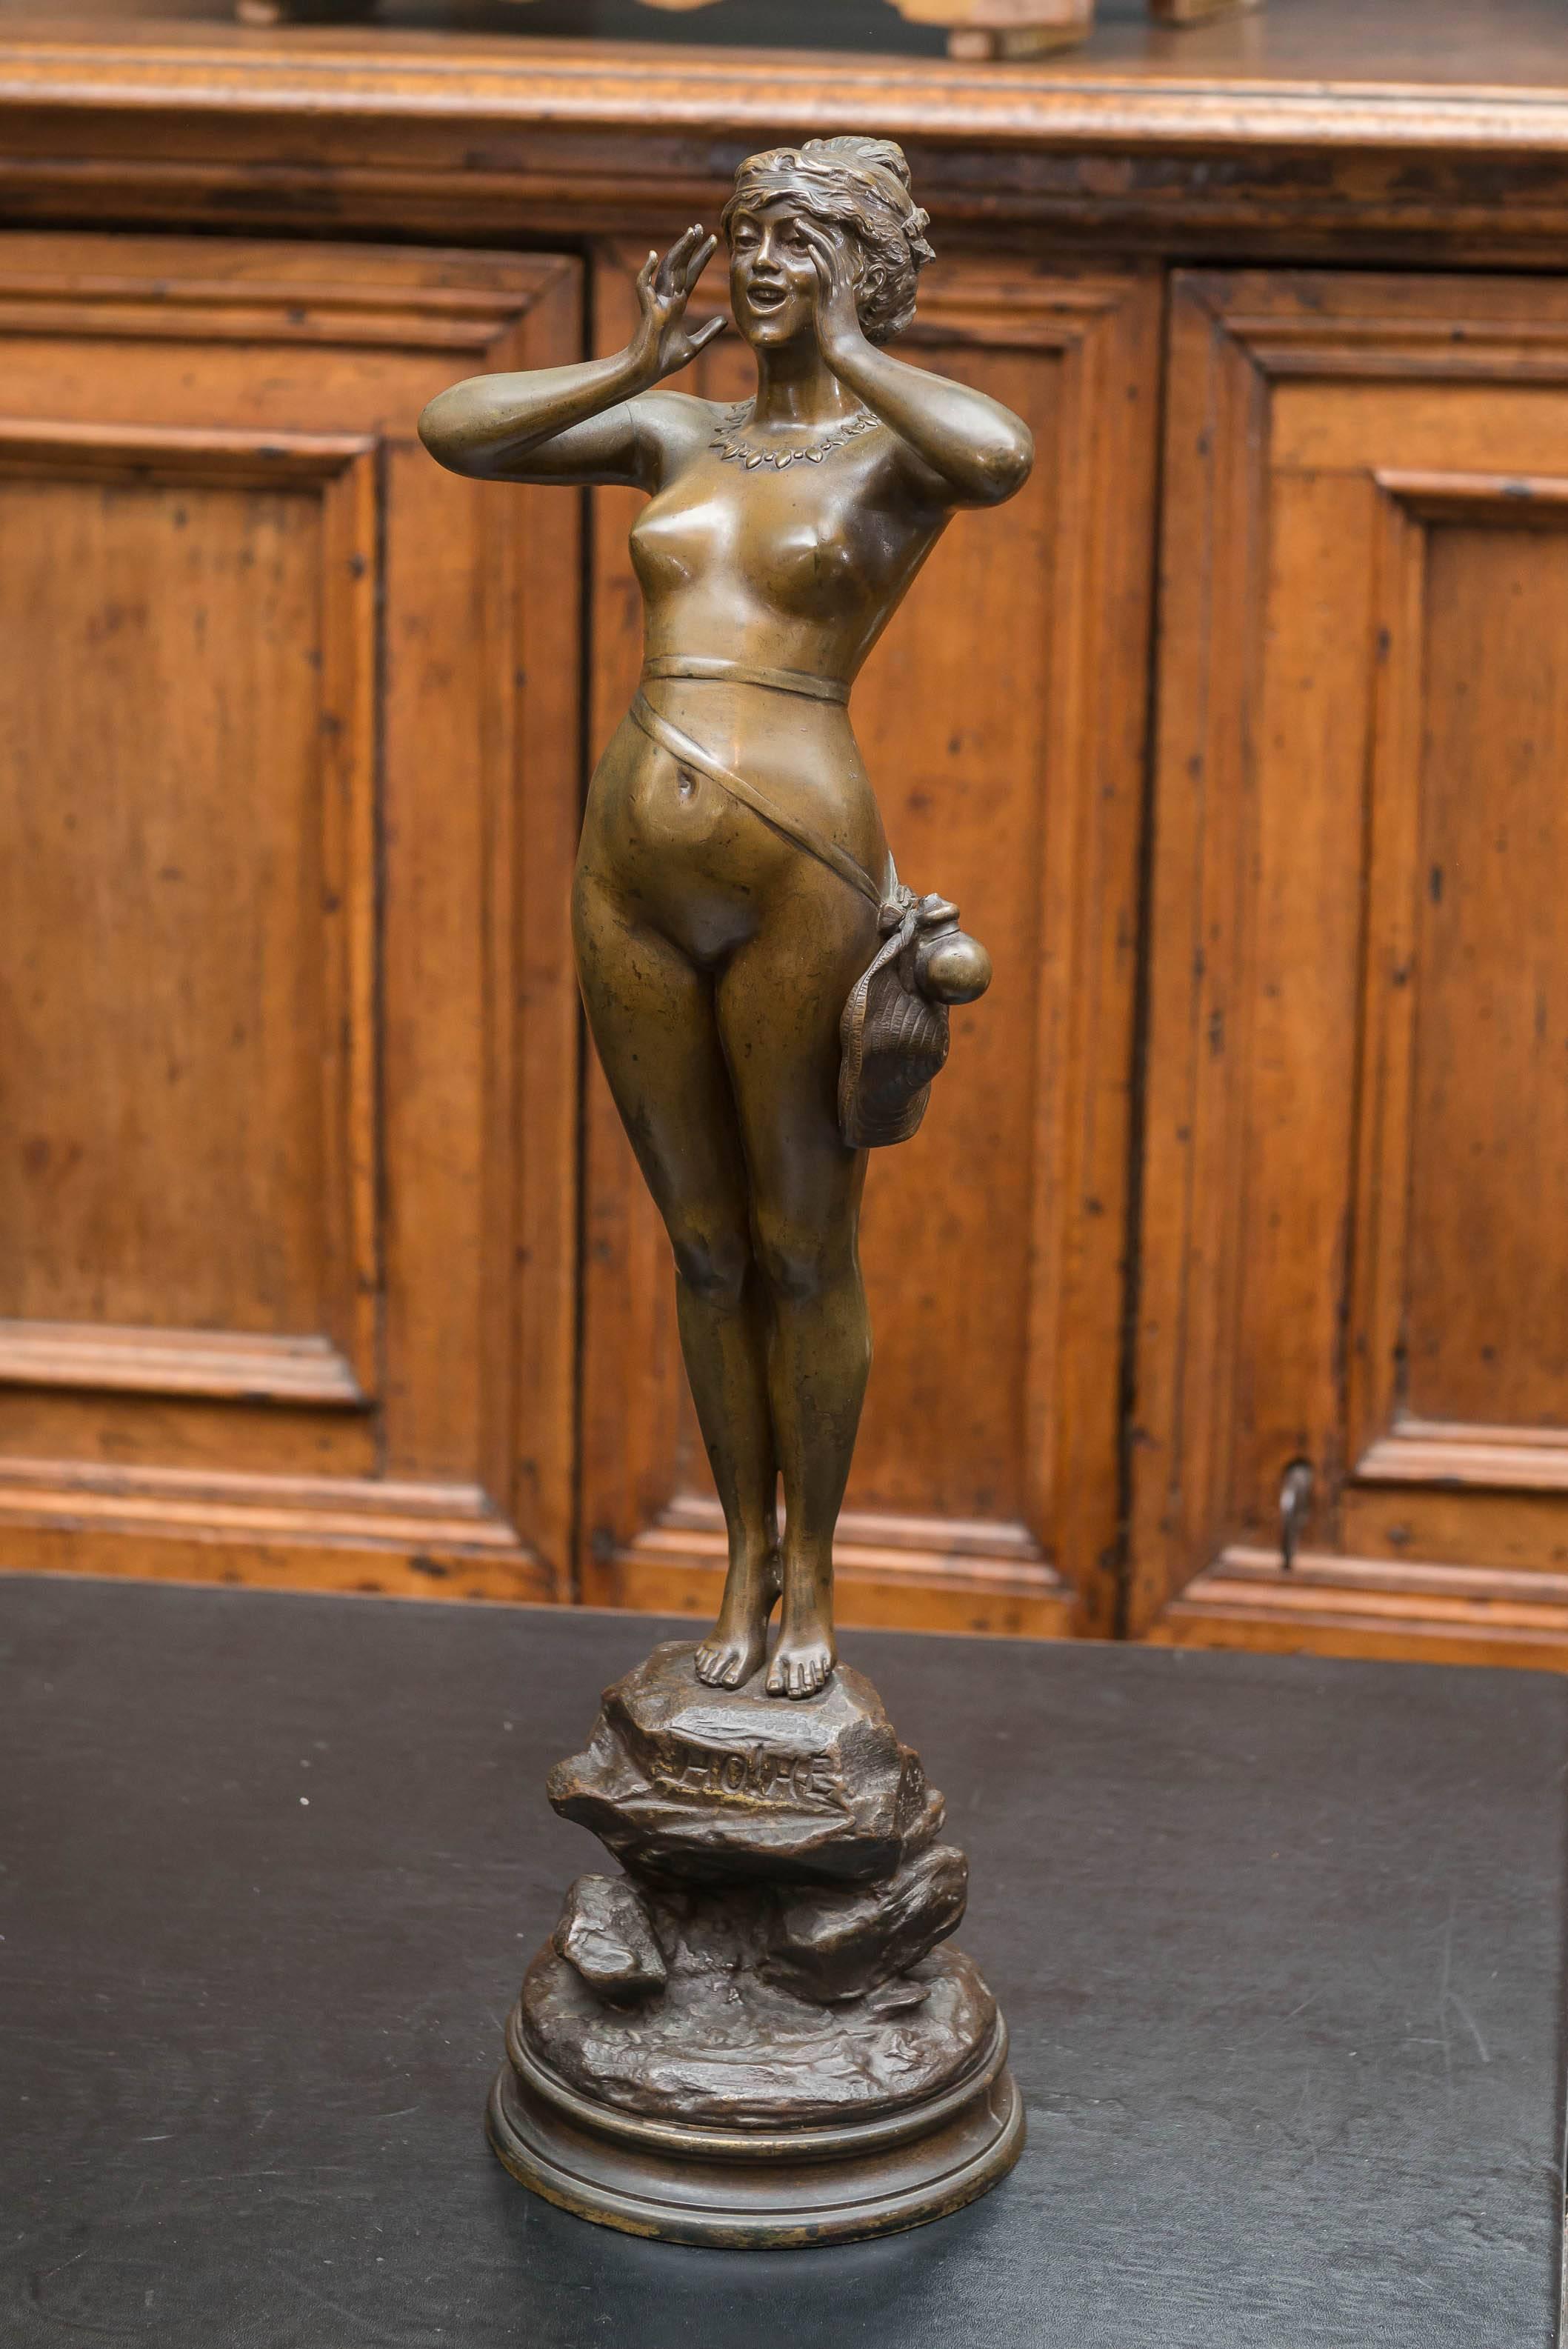 French 19th Century Art Nouveau Bronze Sculpture of a Female Adventurer by A. Grevin